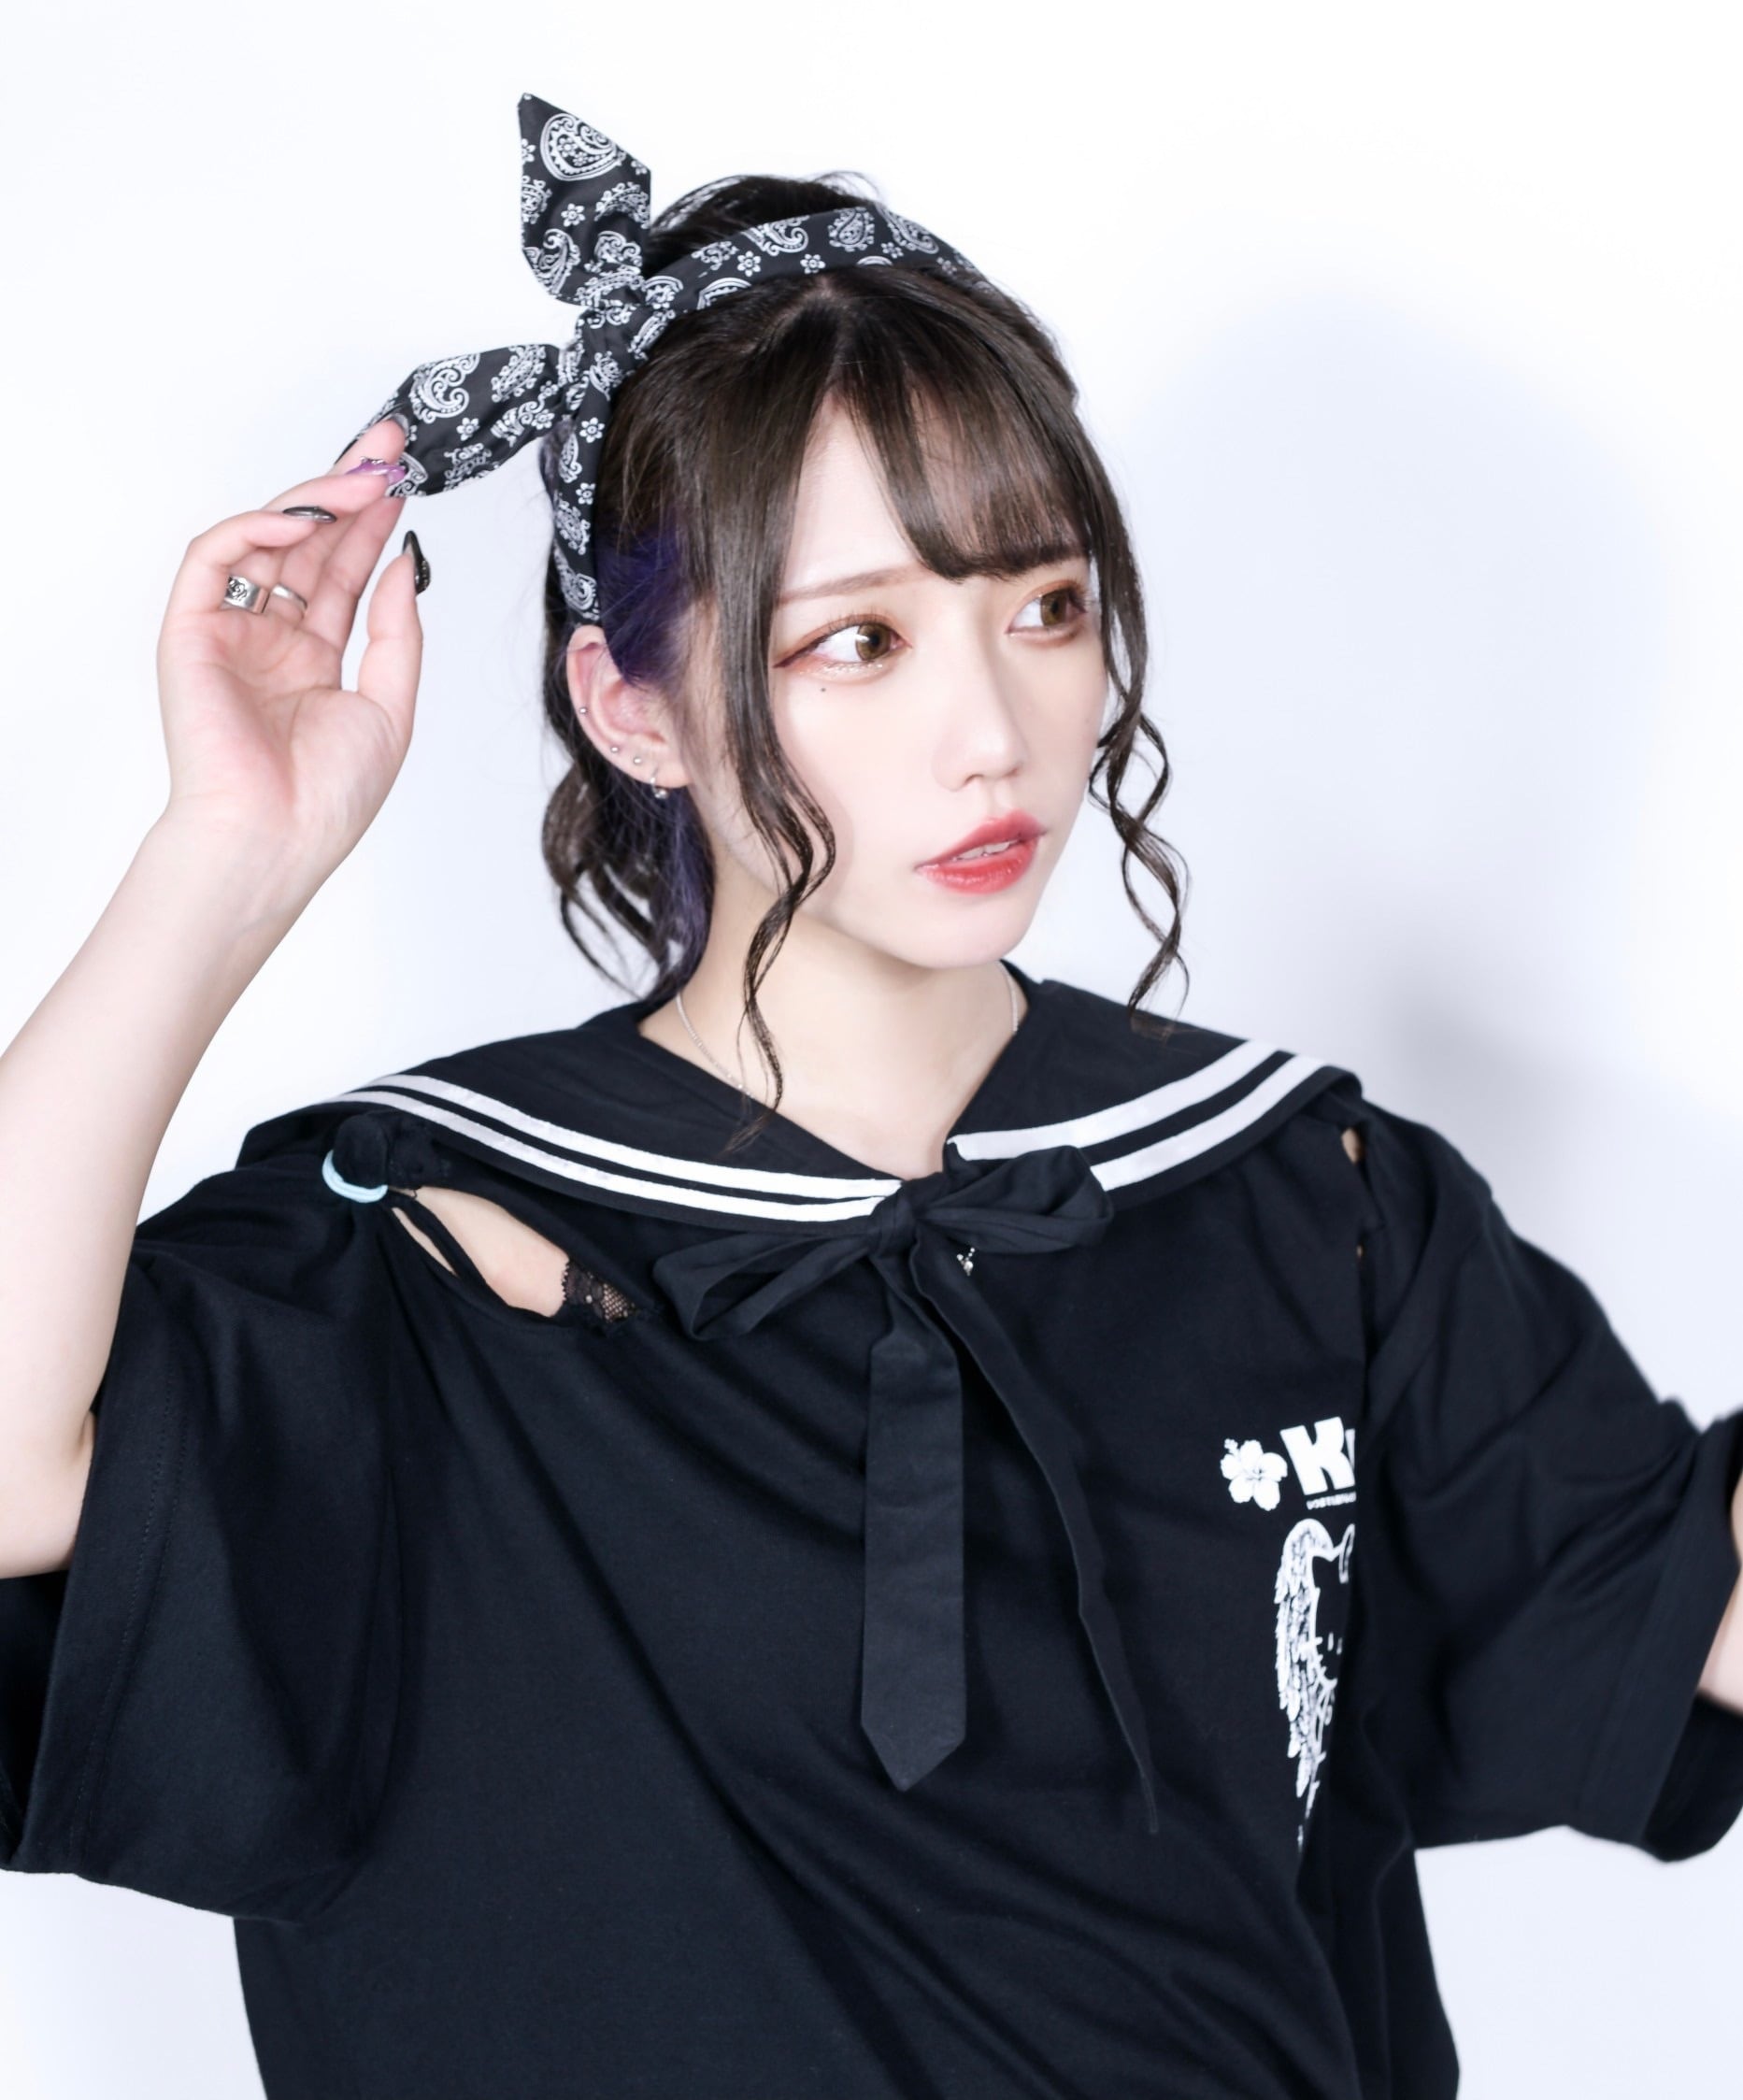 「SAILOR ERI」 | KRY clothing powered by BASE